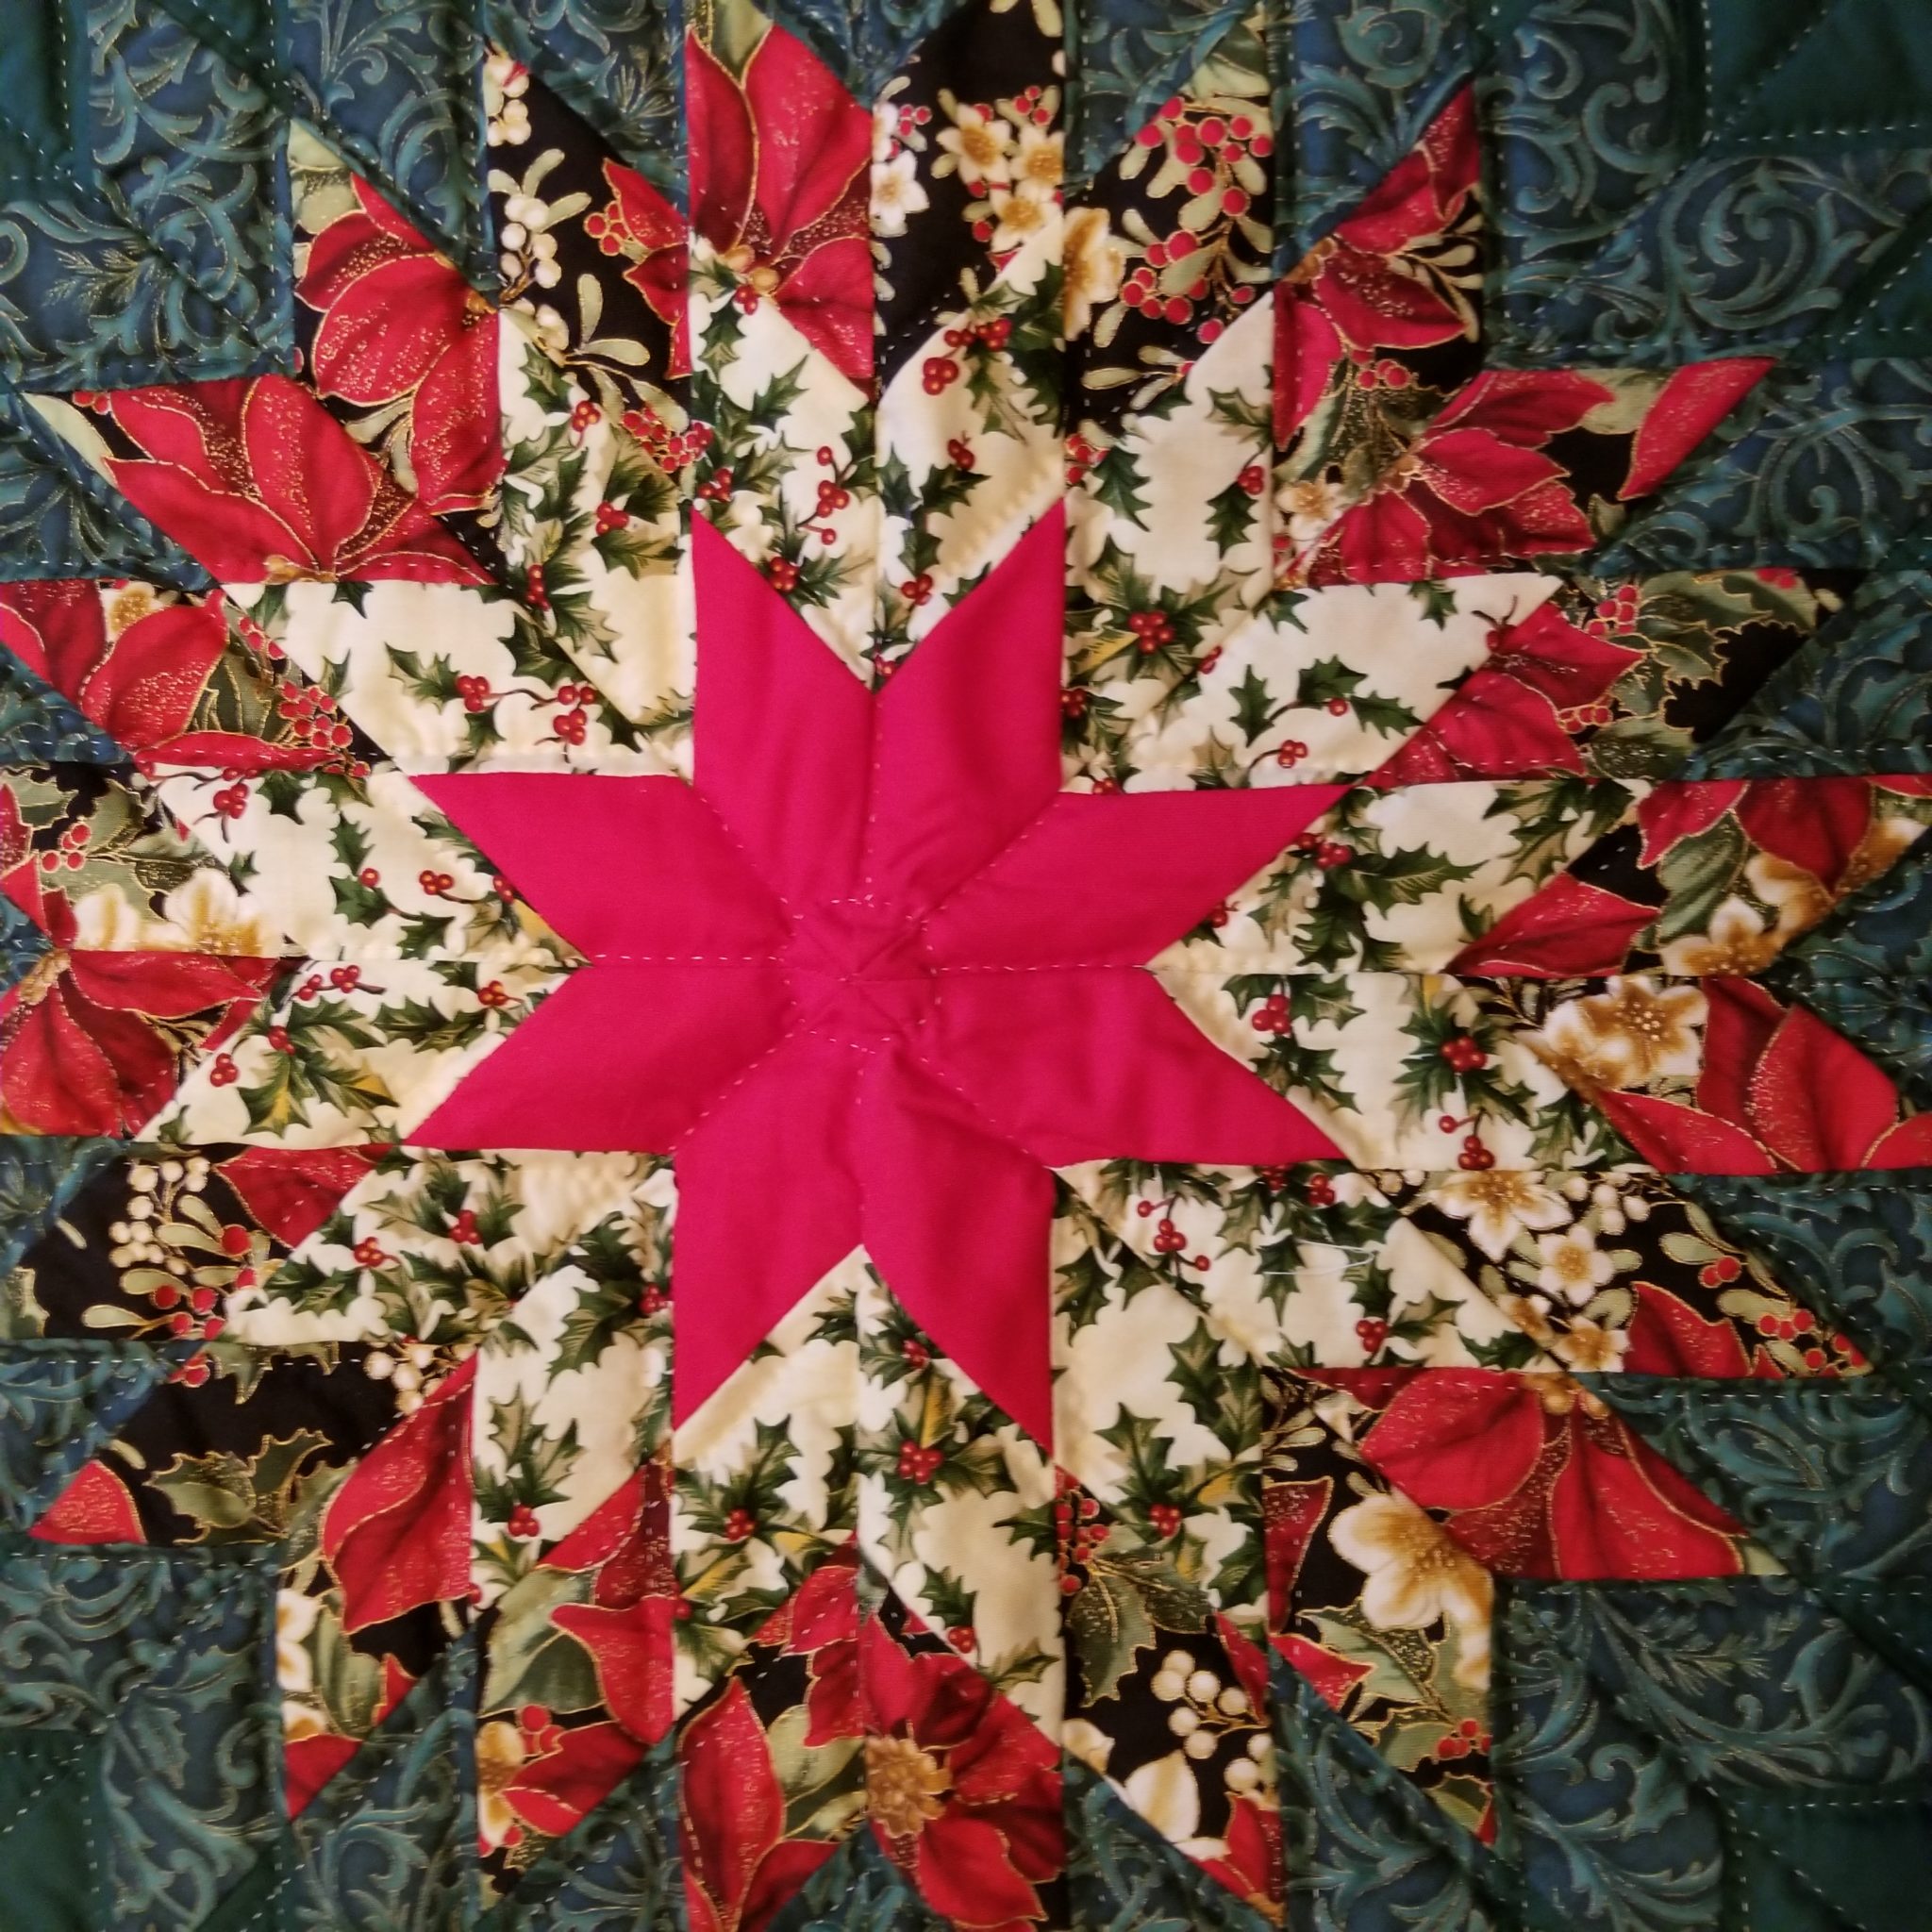 Lone Star - Wall Hanging ~ Family Farm Handcrafts